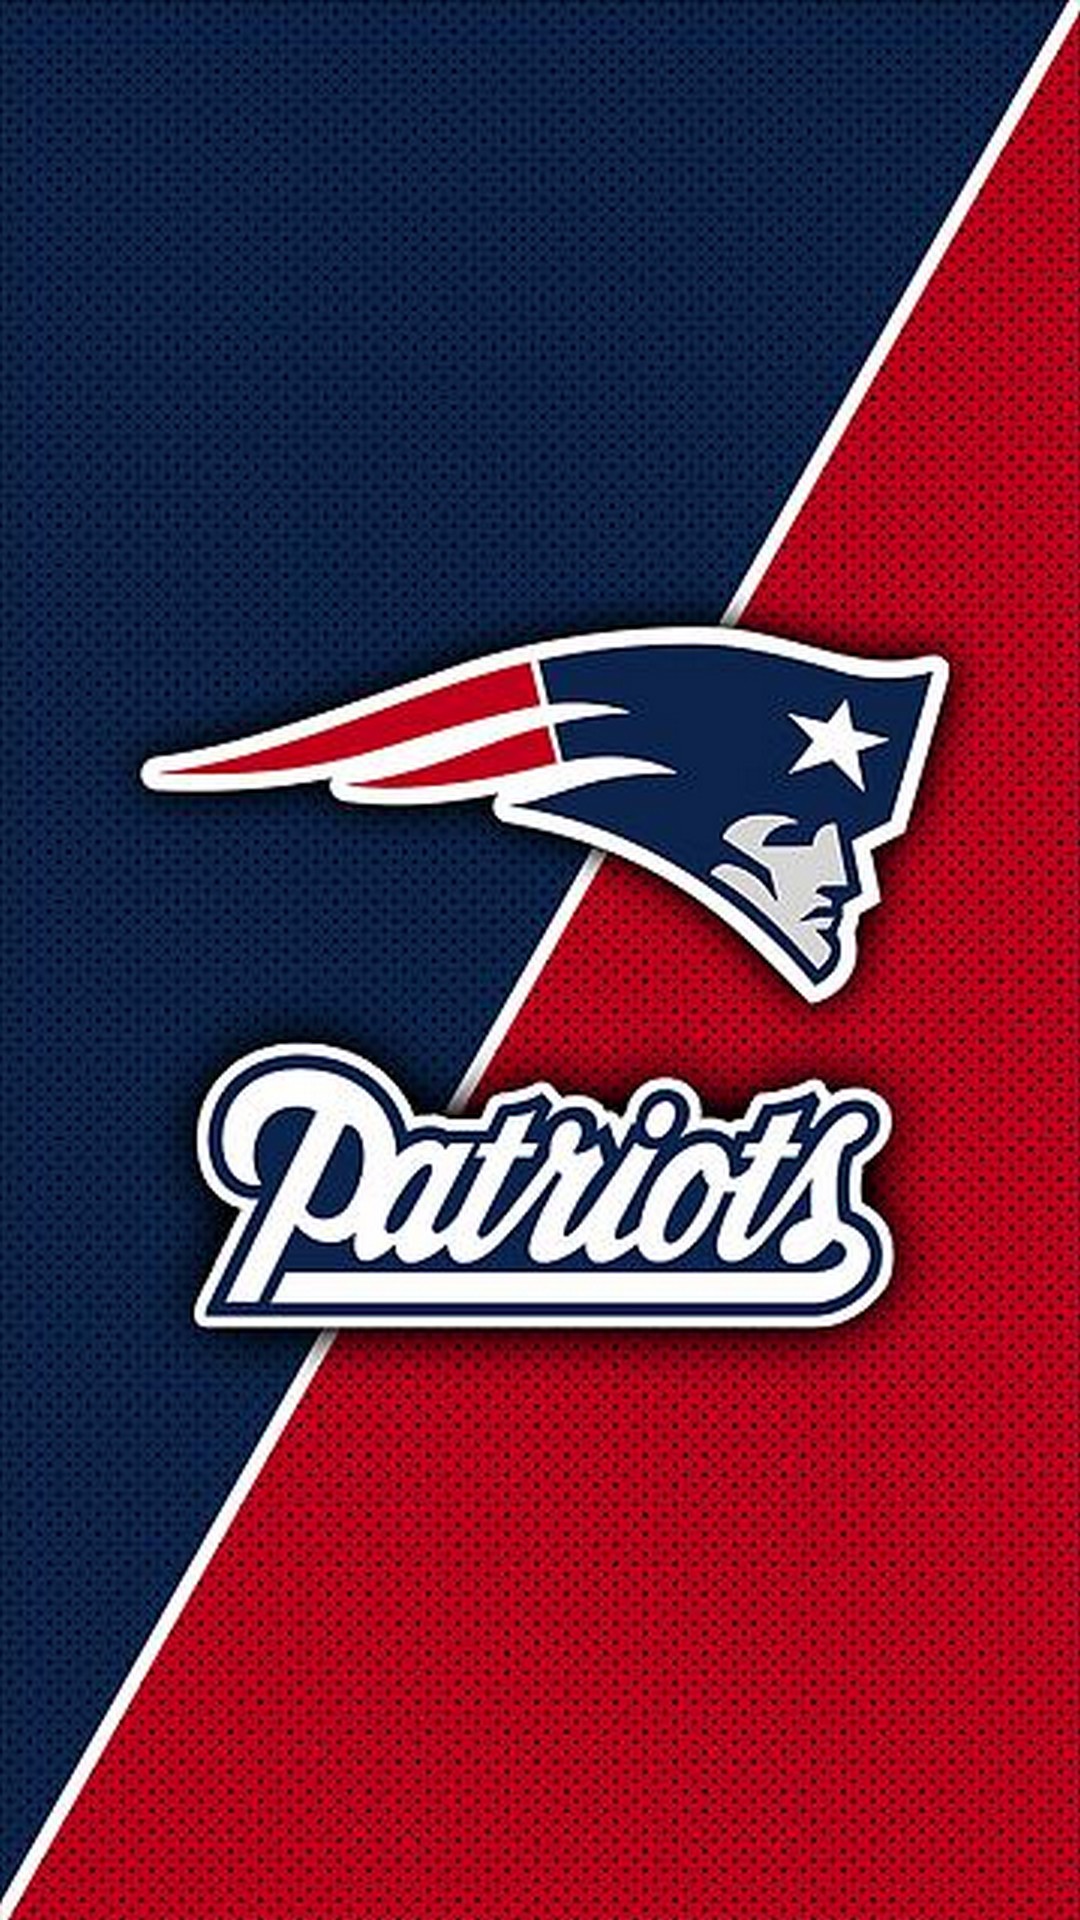 New England Patriots iPhone Wallpaper Tumblr With high-resolution 1080X1920 pixel. Download and set as wallpaper for Apple iPhone X, XS Max, XR, 8, 7, 6, SE, iPad, Android